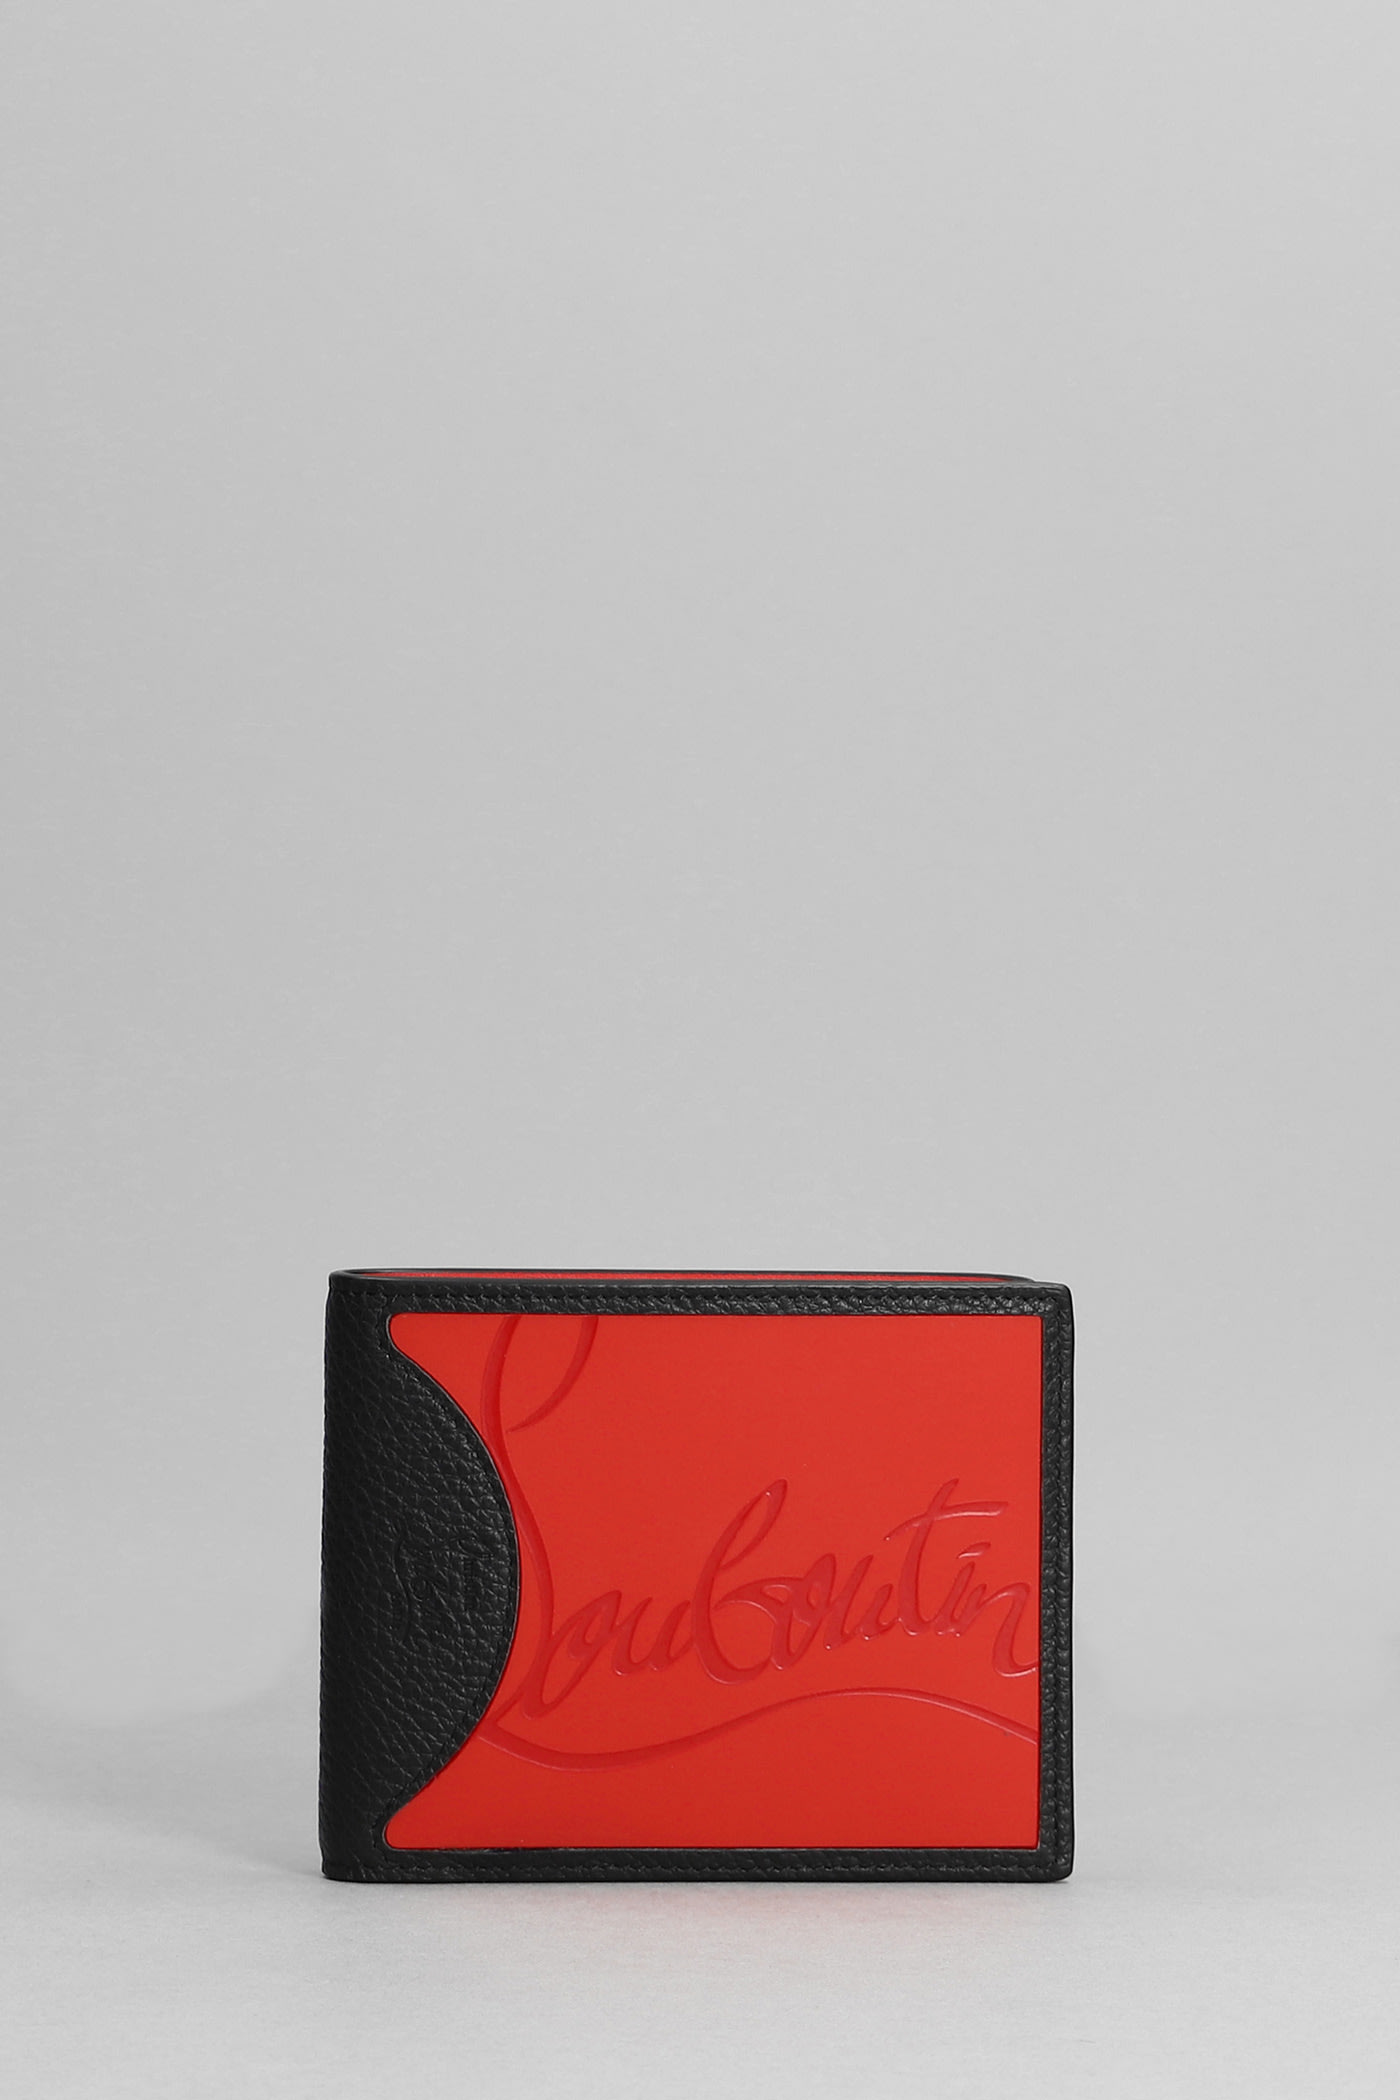 CHRISTIAN LOUBOUTIN COOLCARD WALLET IN BLACK LEATHER